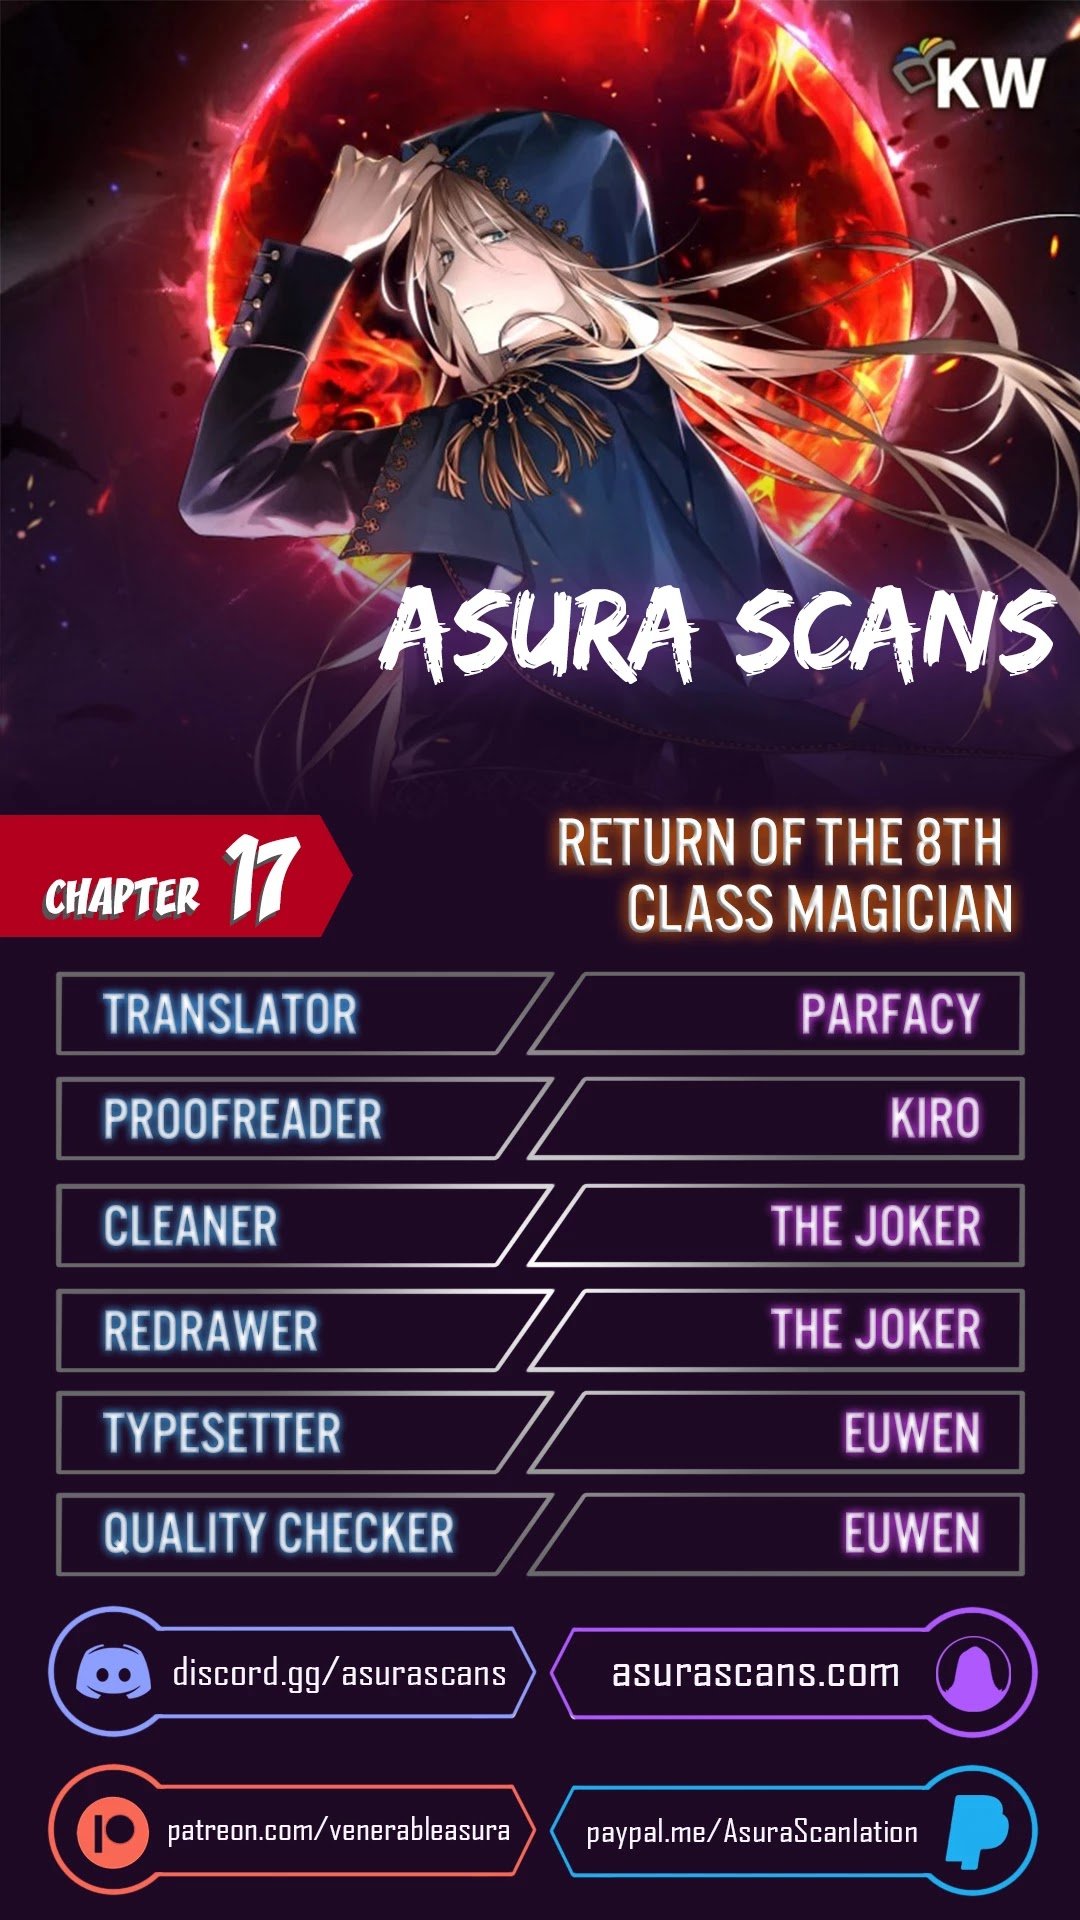 Return of the 8th class Magician chapter 17